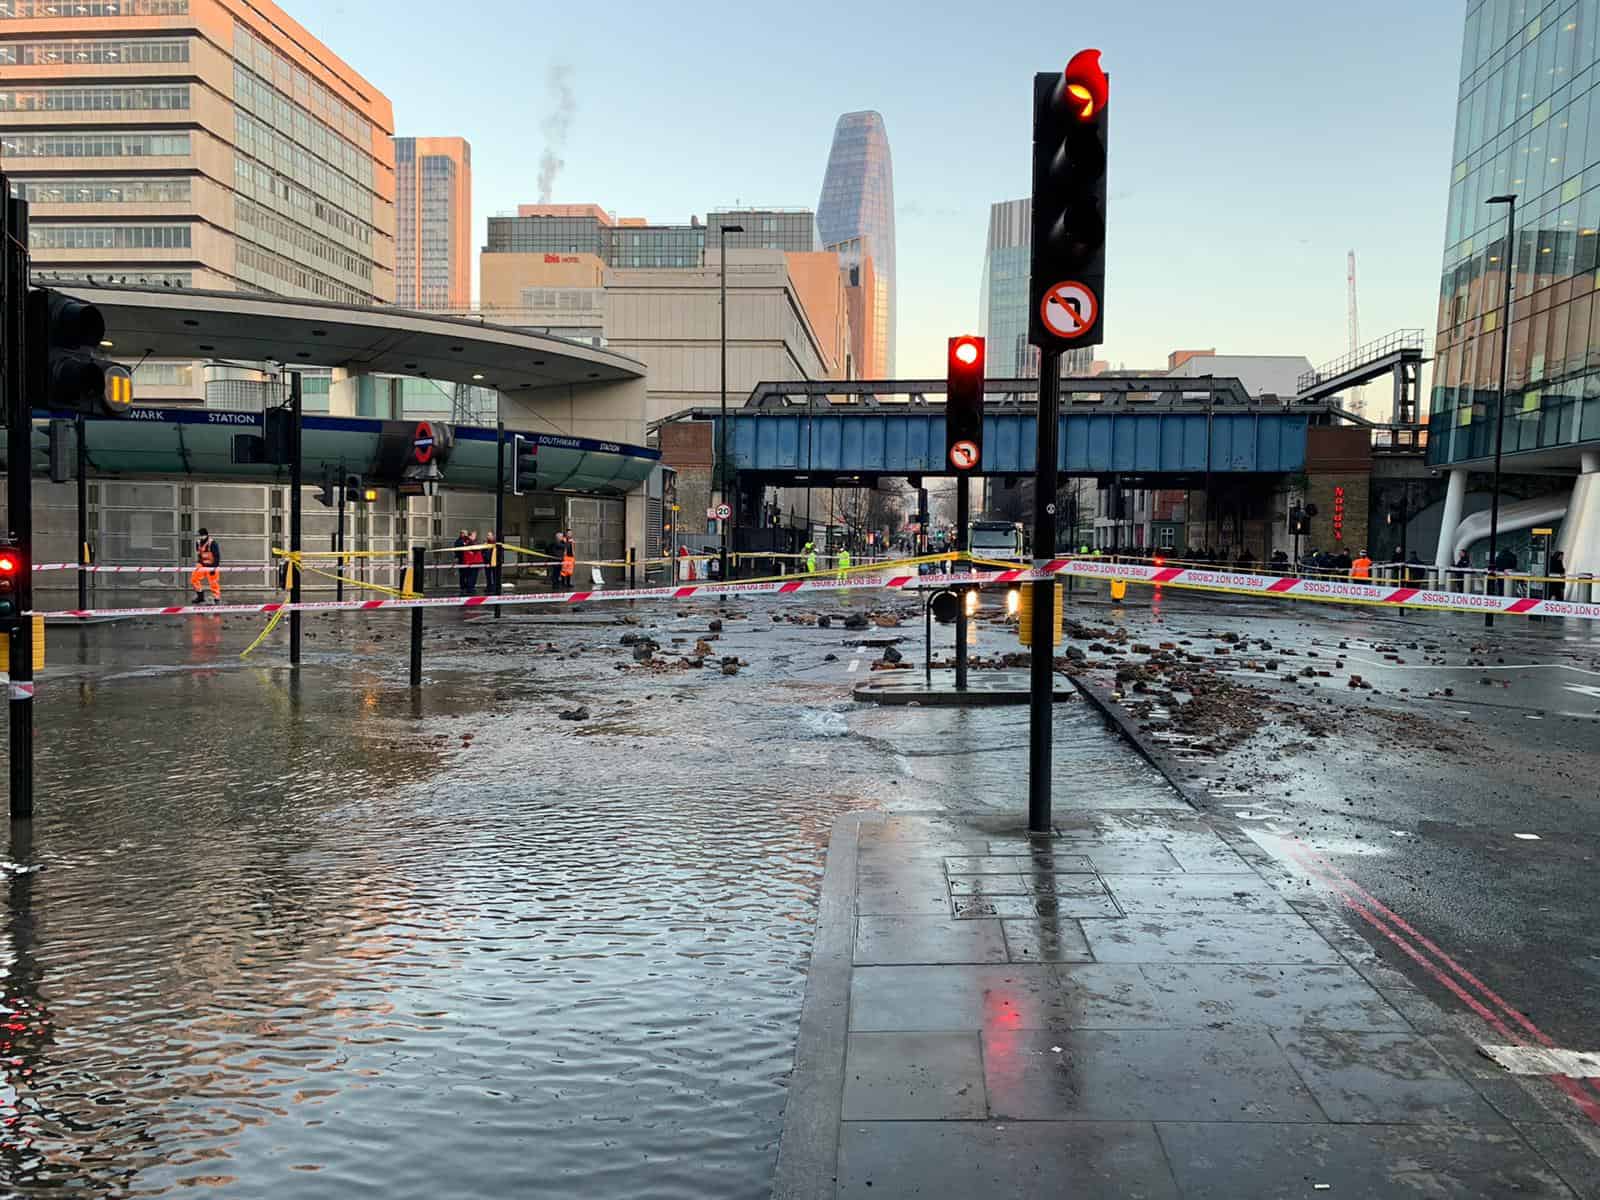 The flooding outside Southwark tube this week